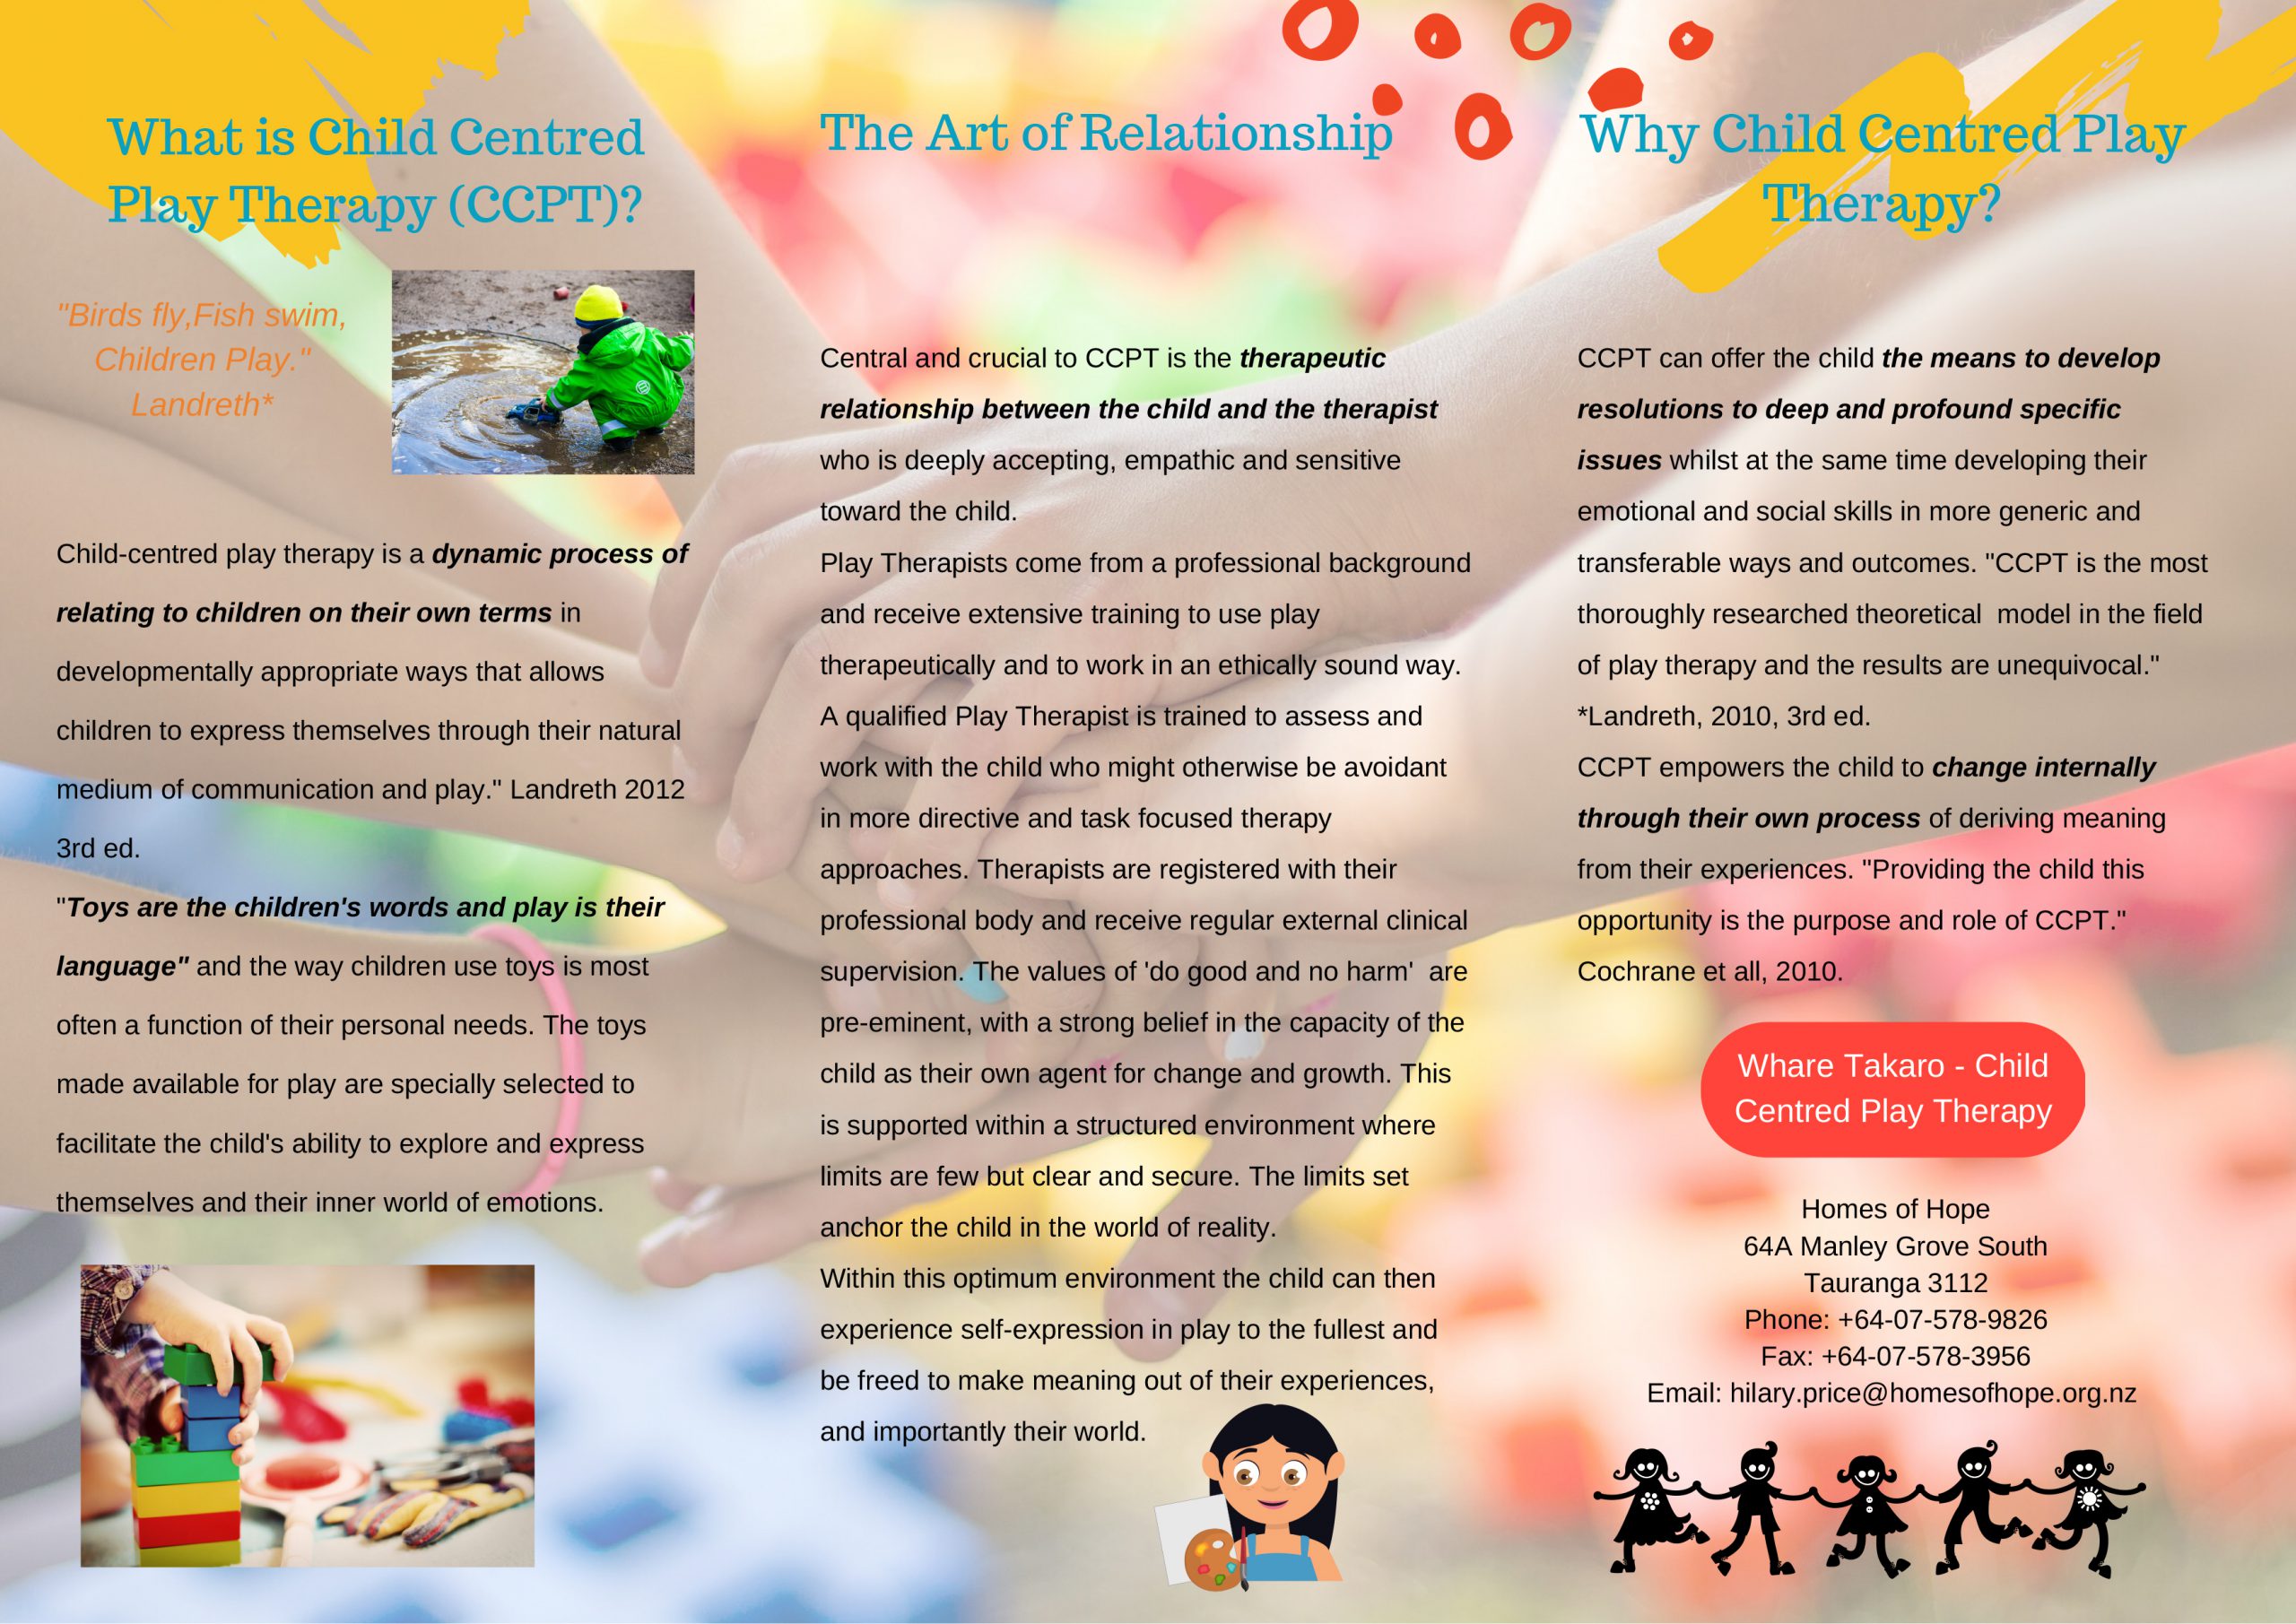 What is Child Centred Play Therapy